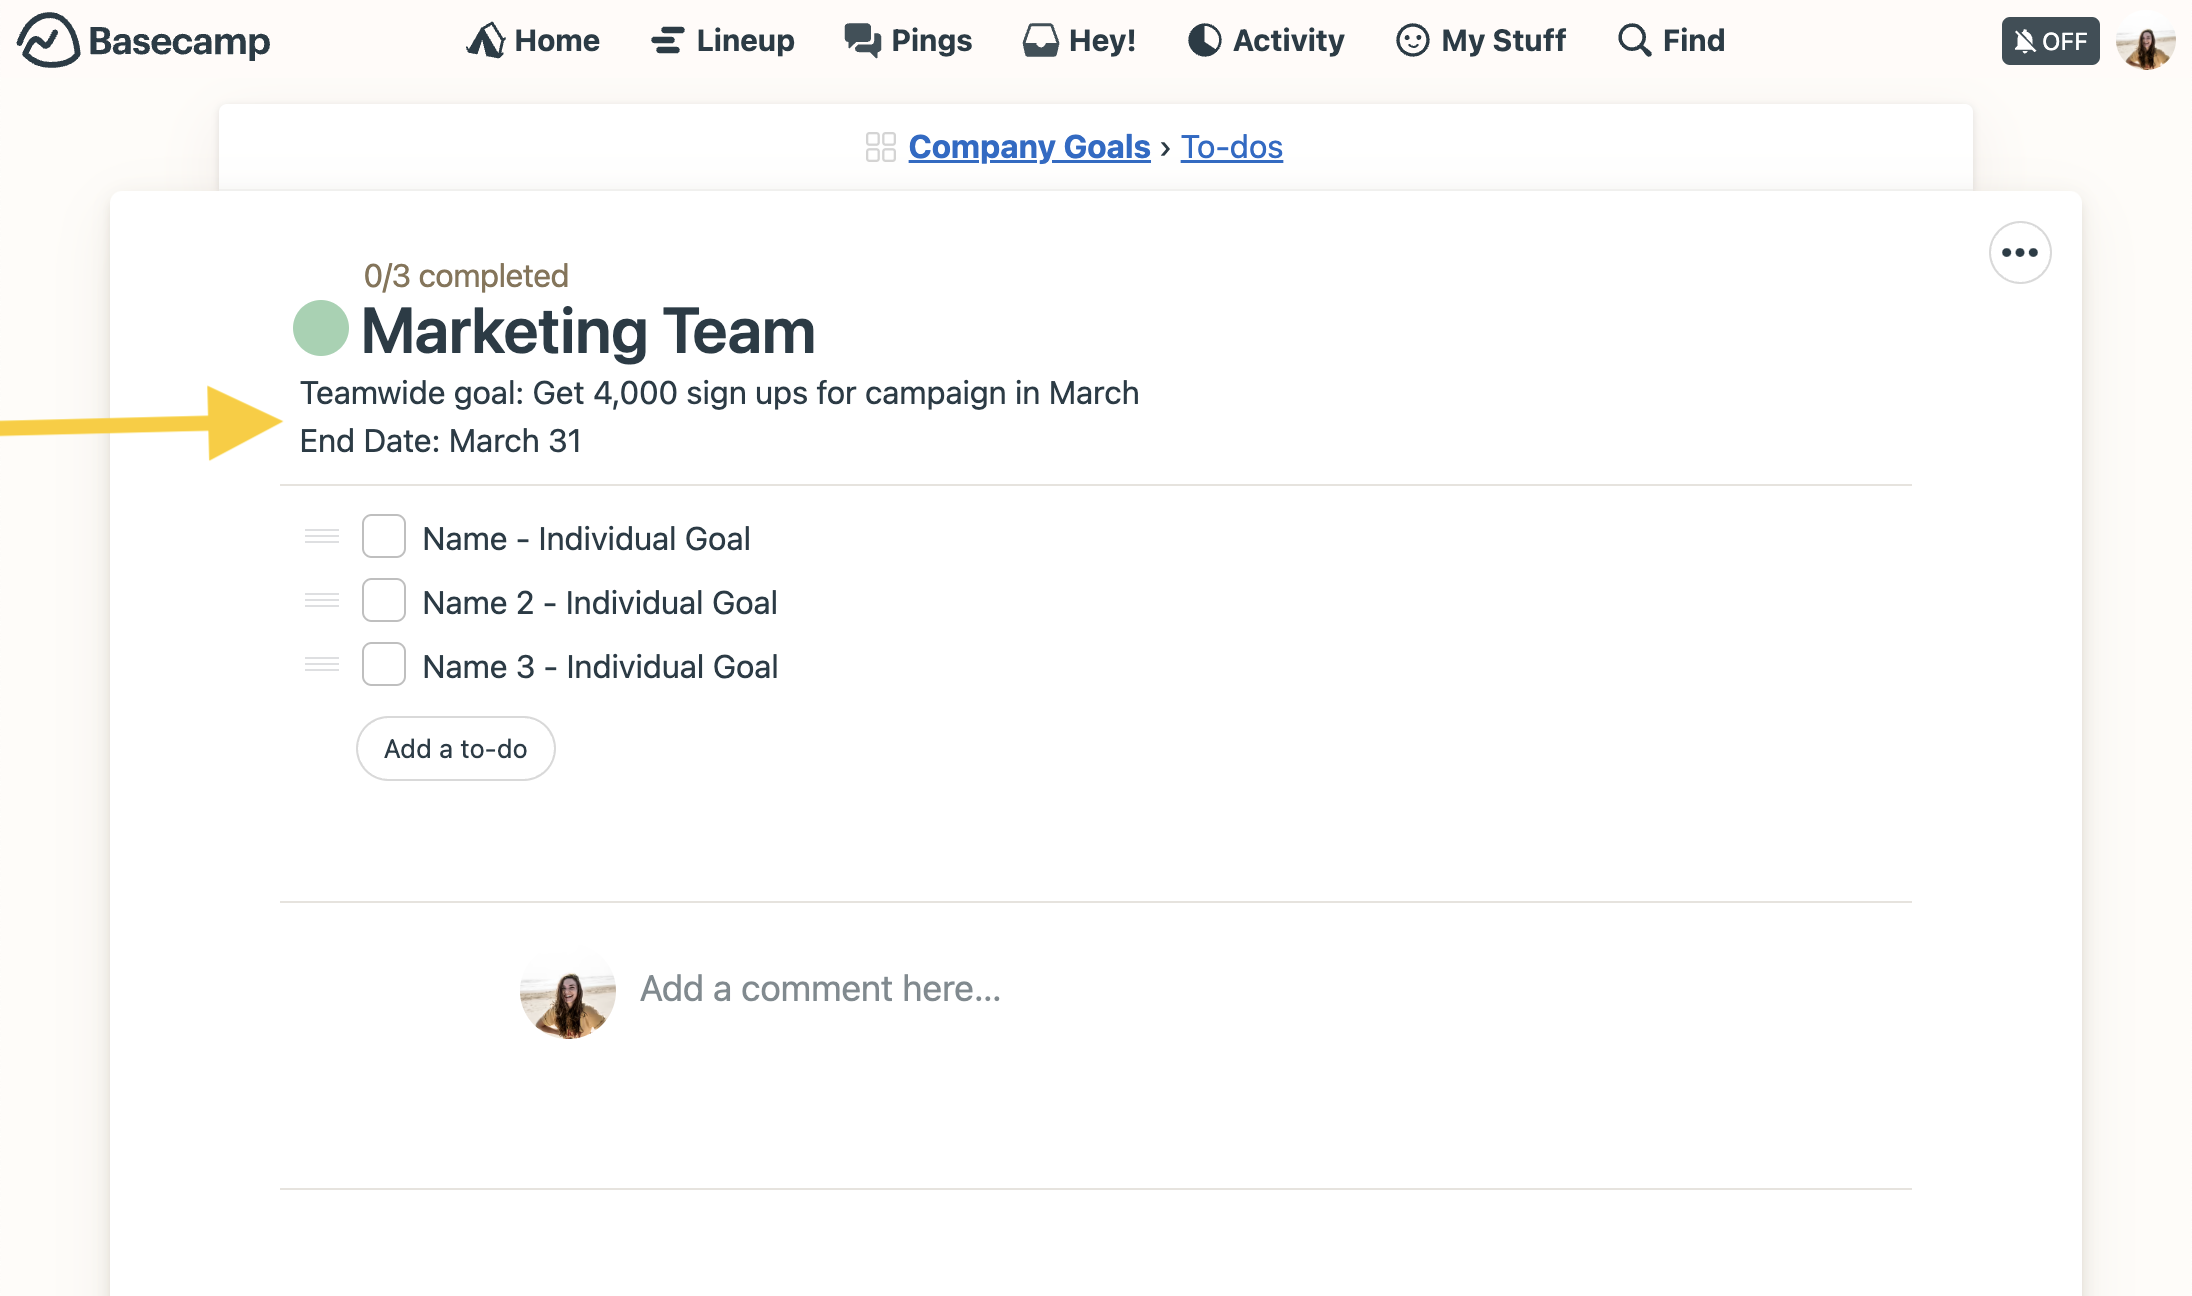 Examples of including Teamwide Goal and End Date in to-do list details inside Basecamp.